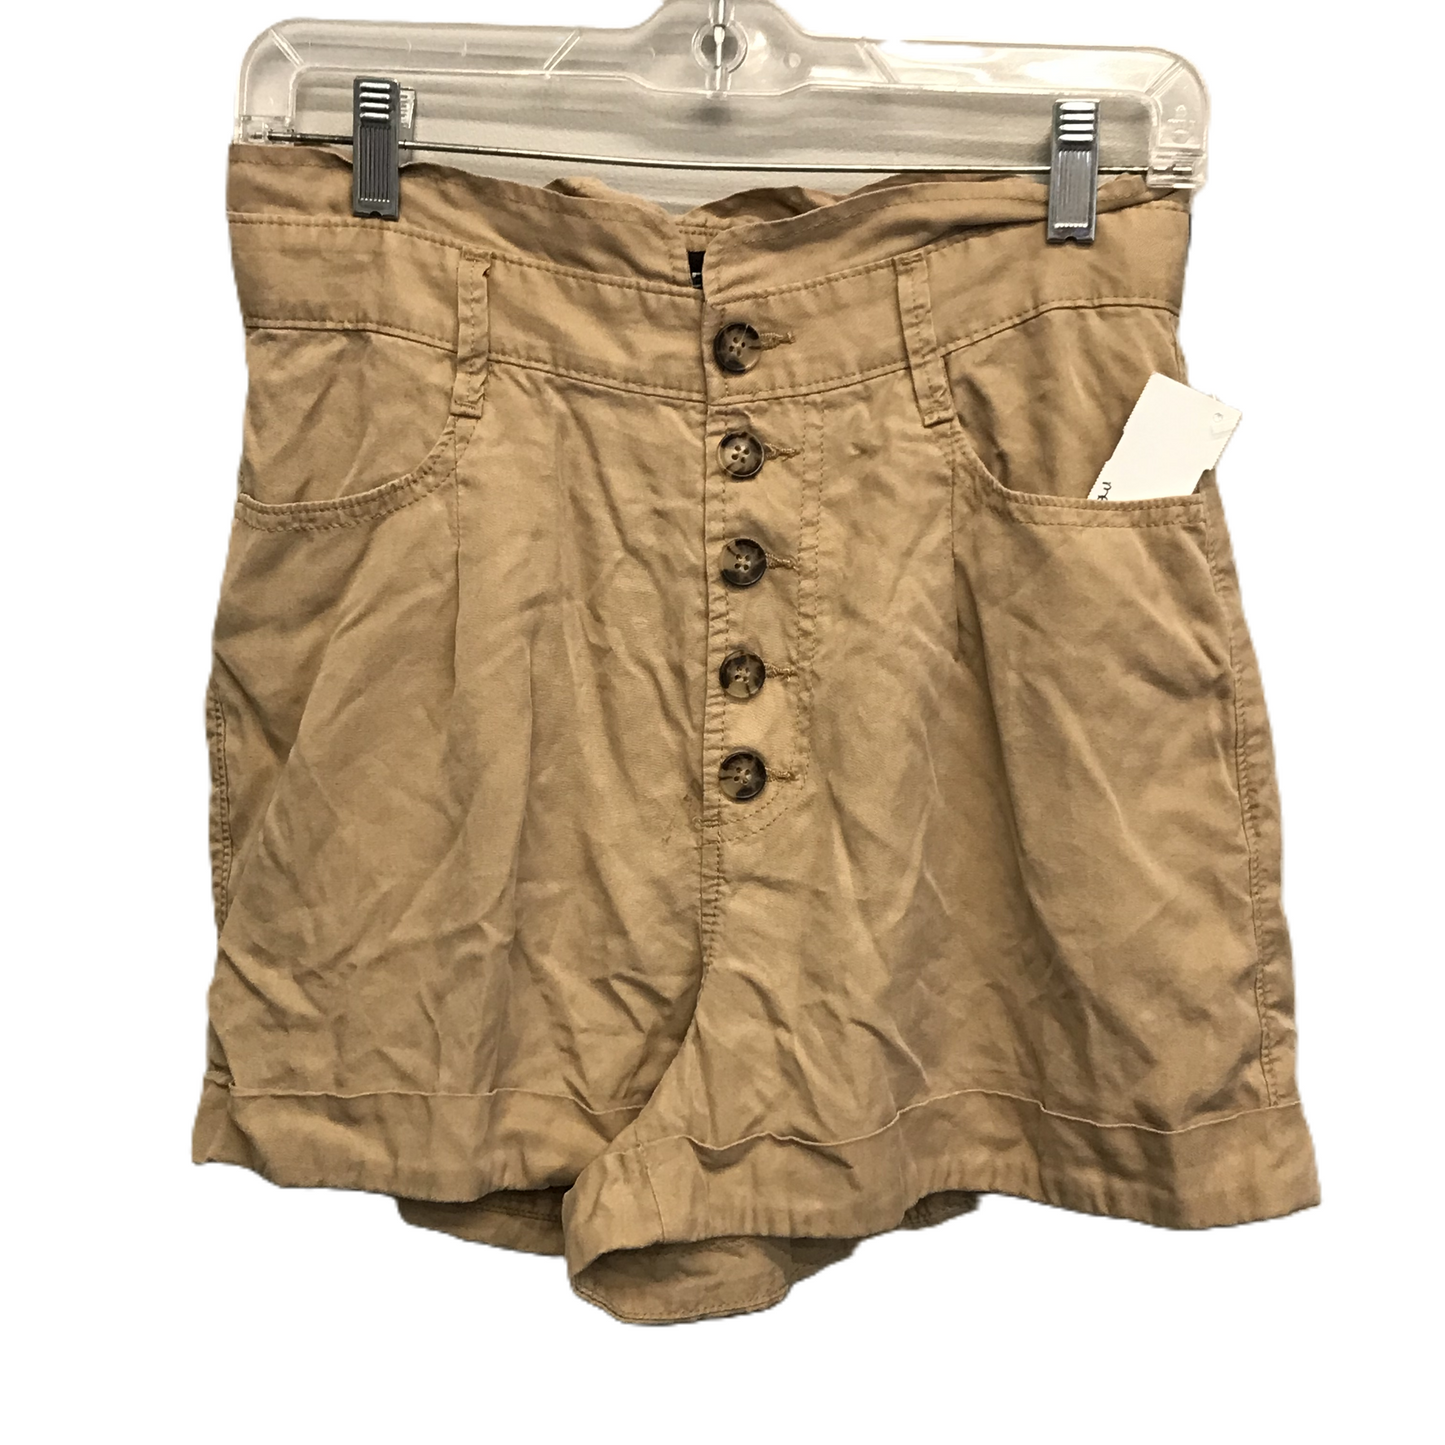 Beige Shorts By Express, Size: 4